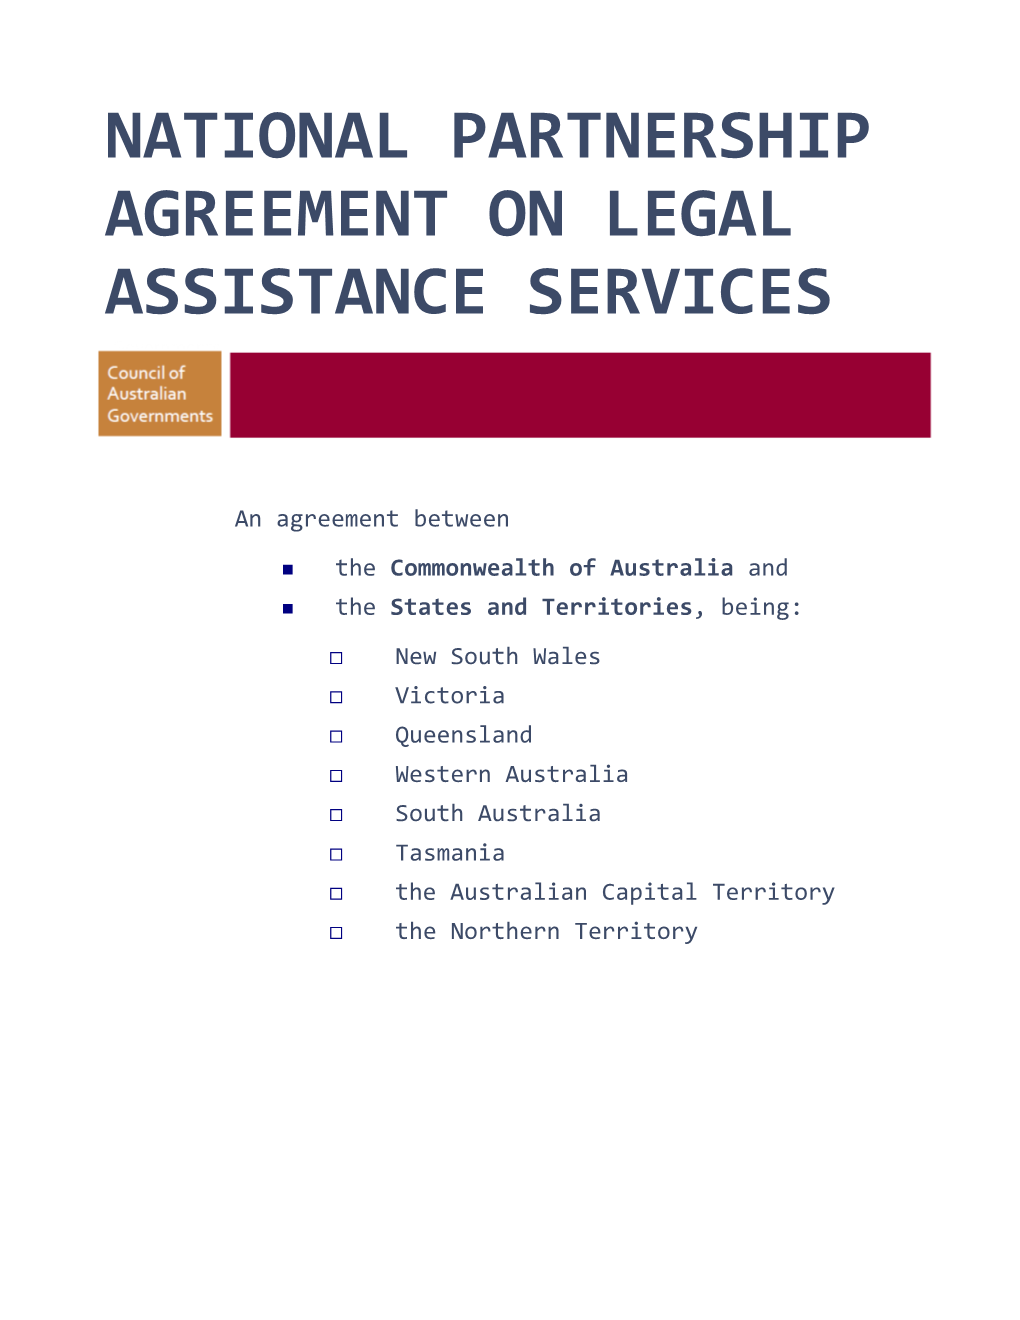 National Partnerships Agreement on Legal Services